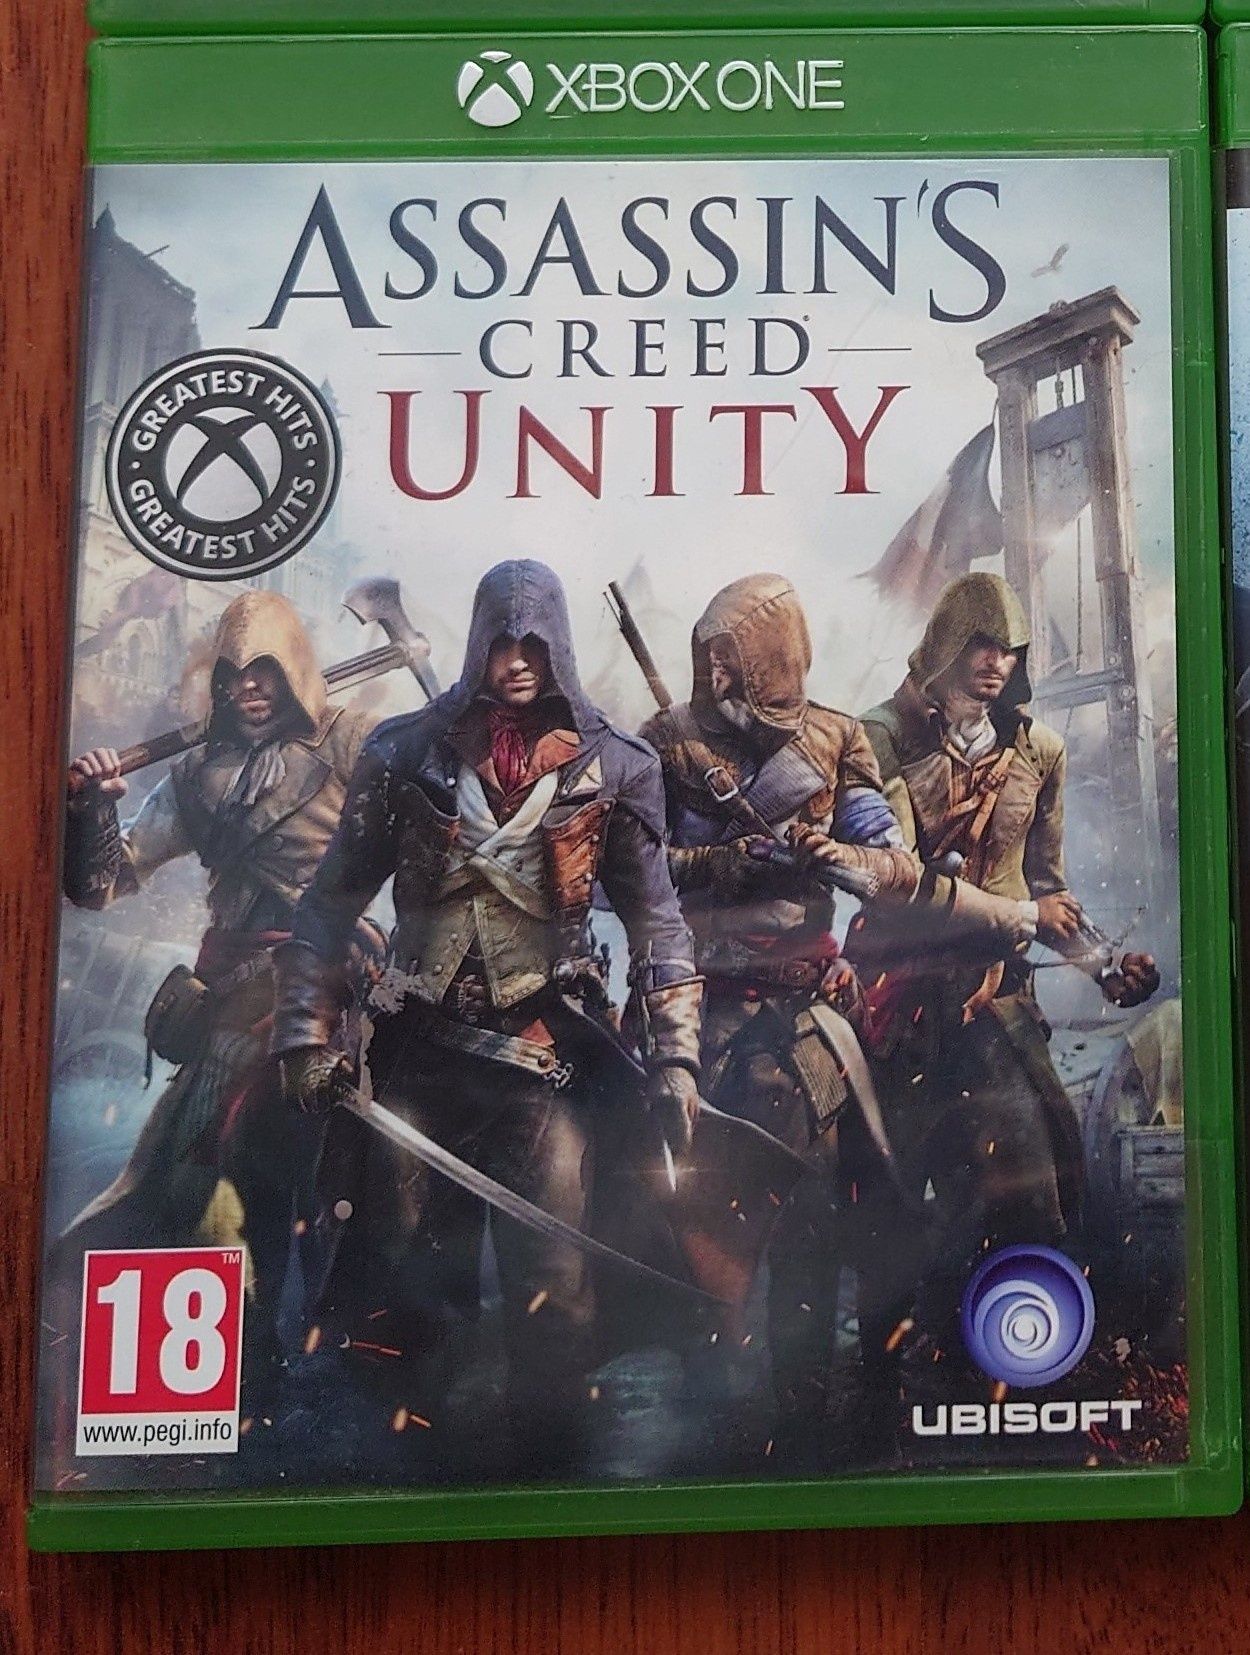 Joc Xbox One S X Farcry 4, Assassins Creed Unity, Monster Hunter